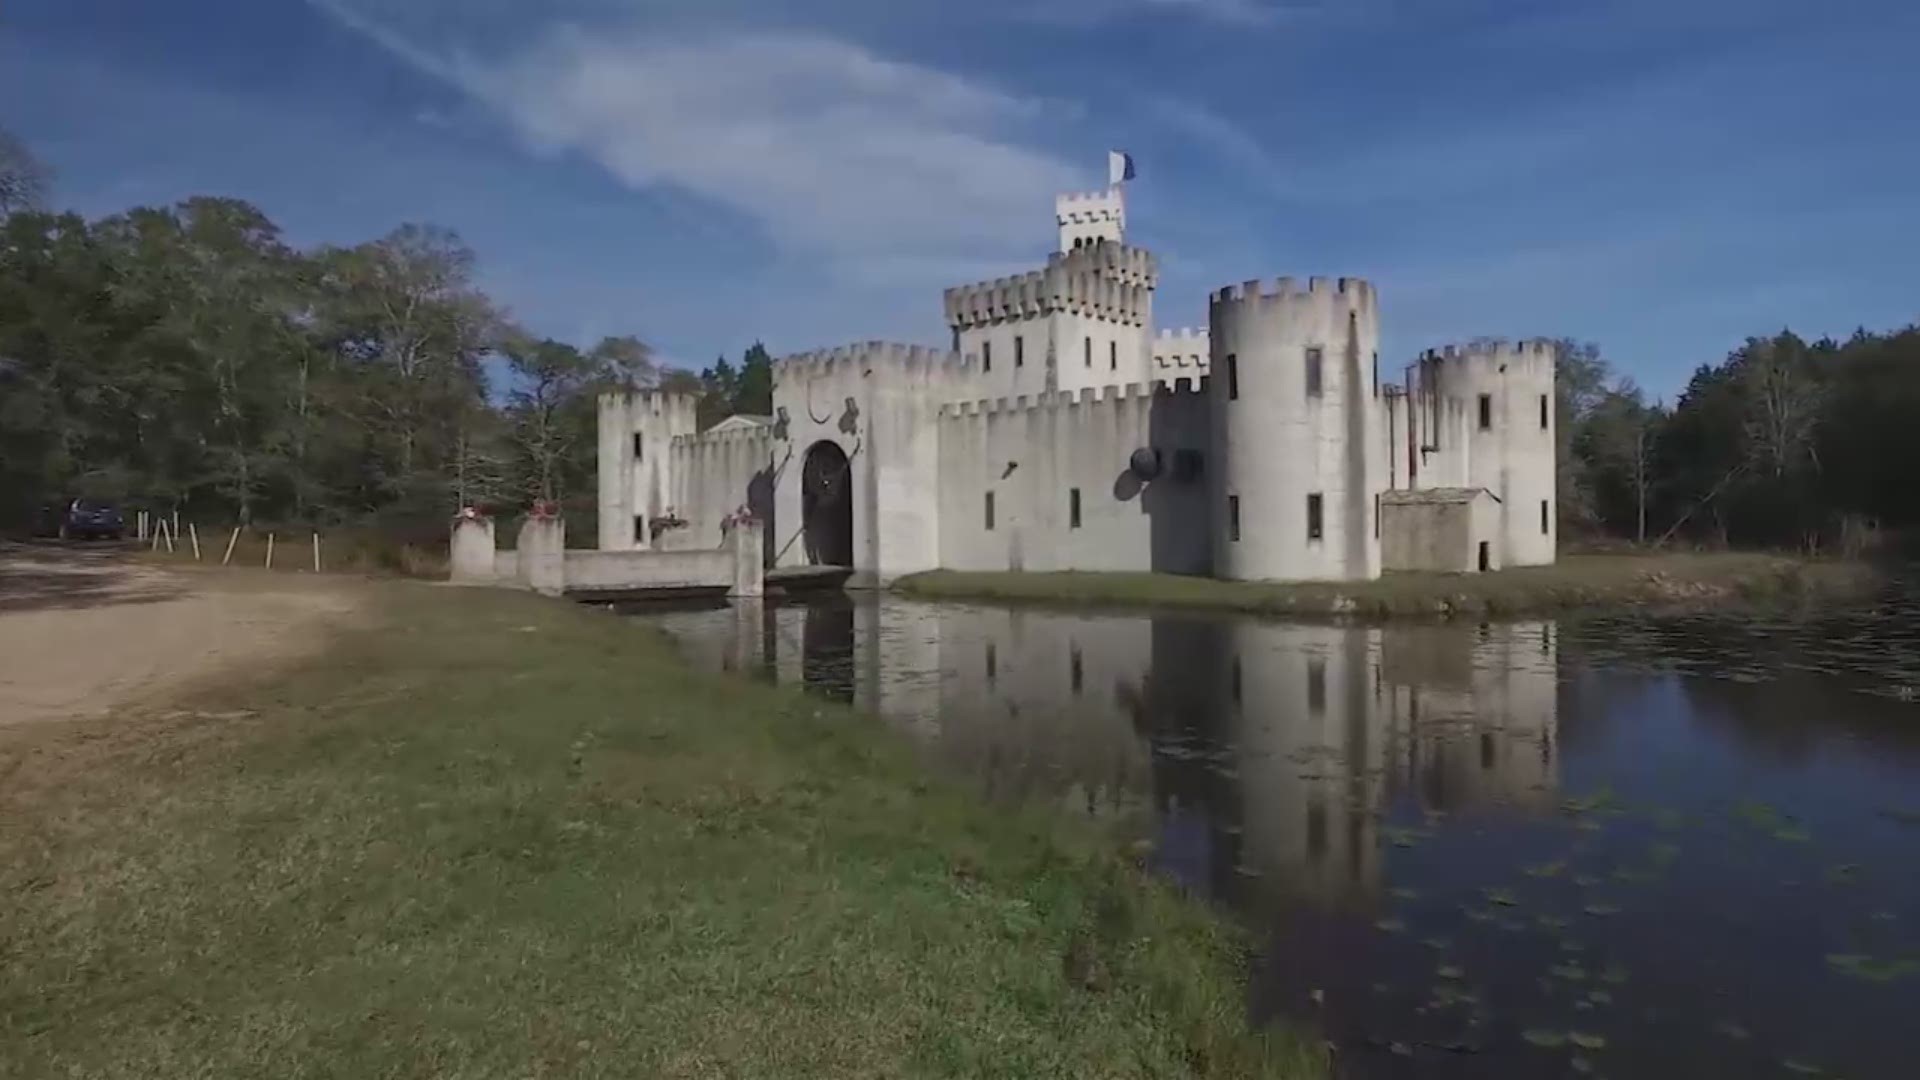 Here's a taste of you might experience when you go for a tour of Newman's Castle in Bellville, Texas.